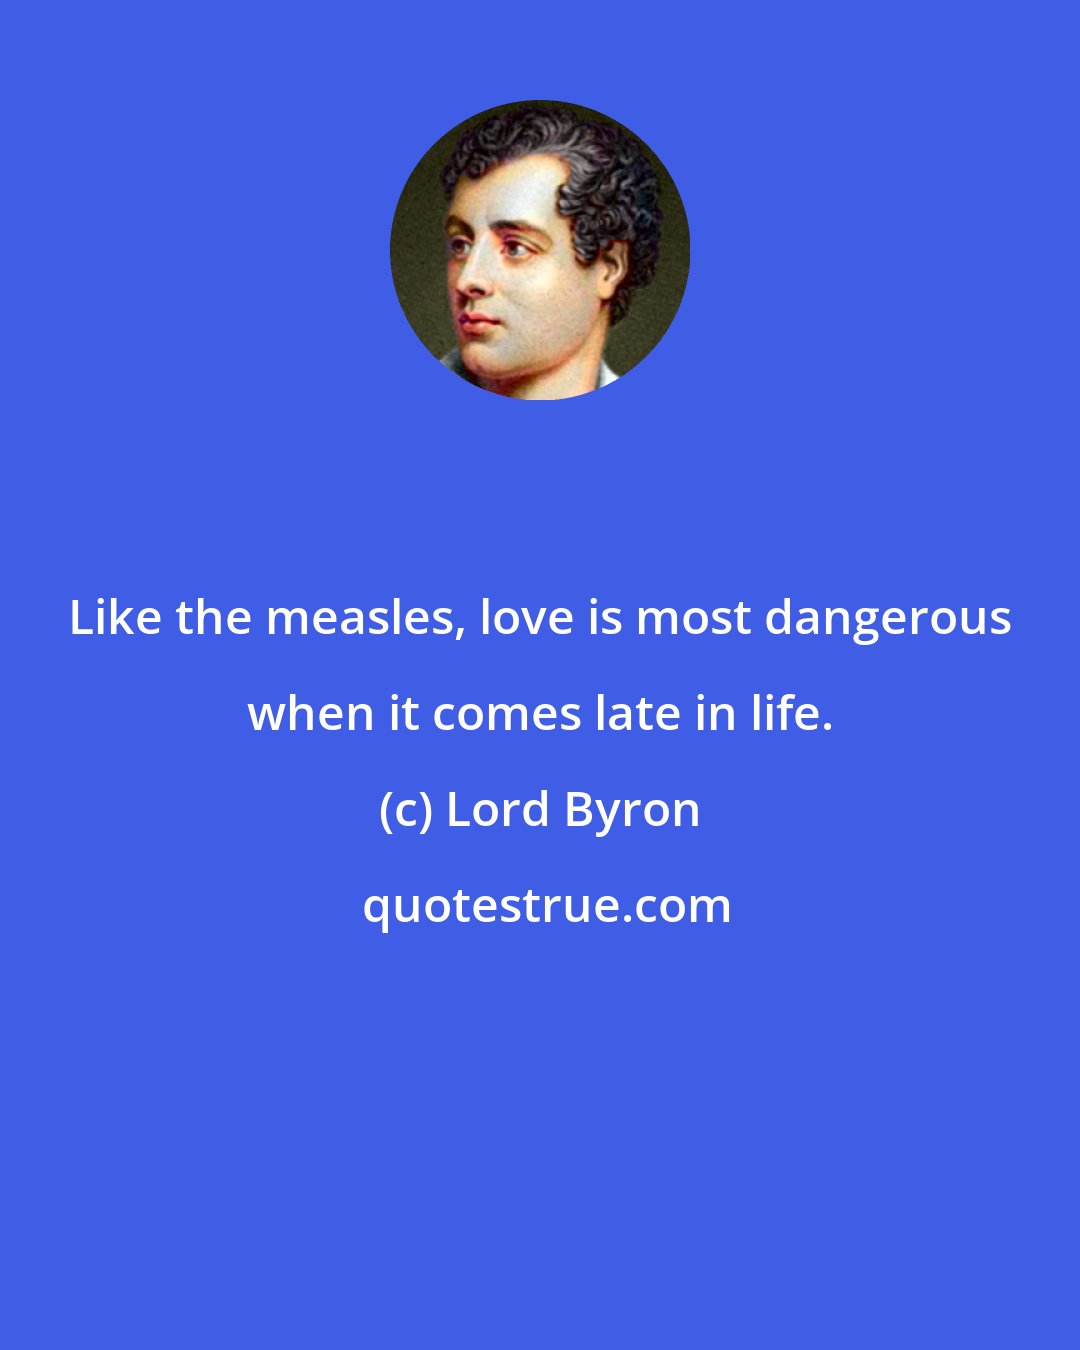 Lord Byron: Like the measles, love is most dangerous when it comes late in life.